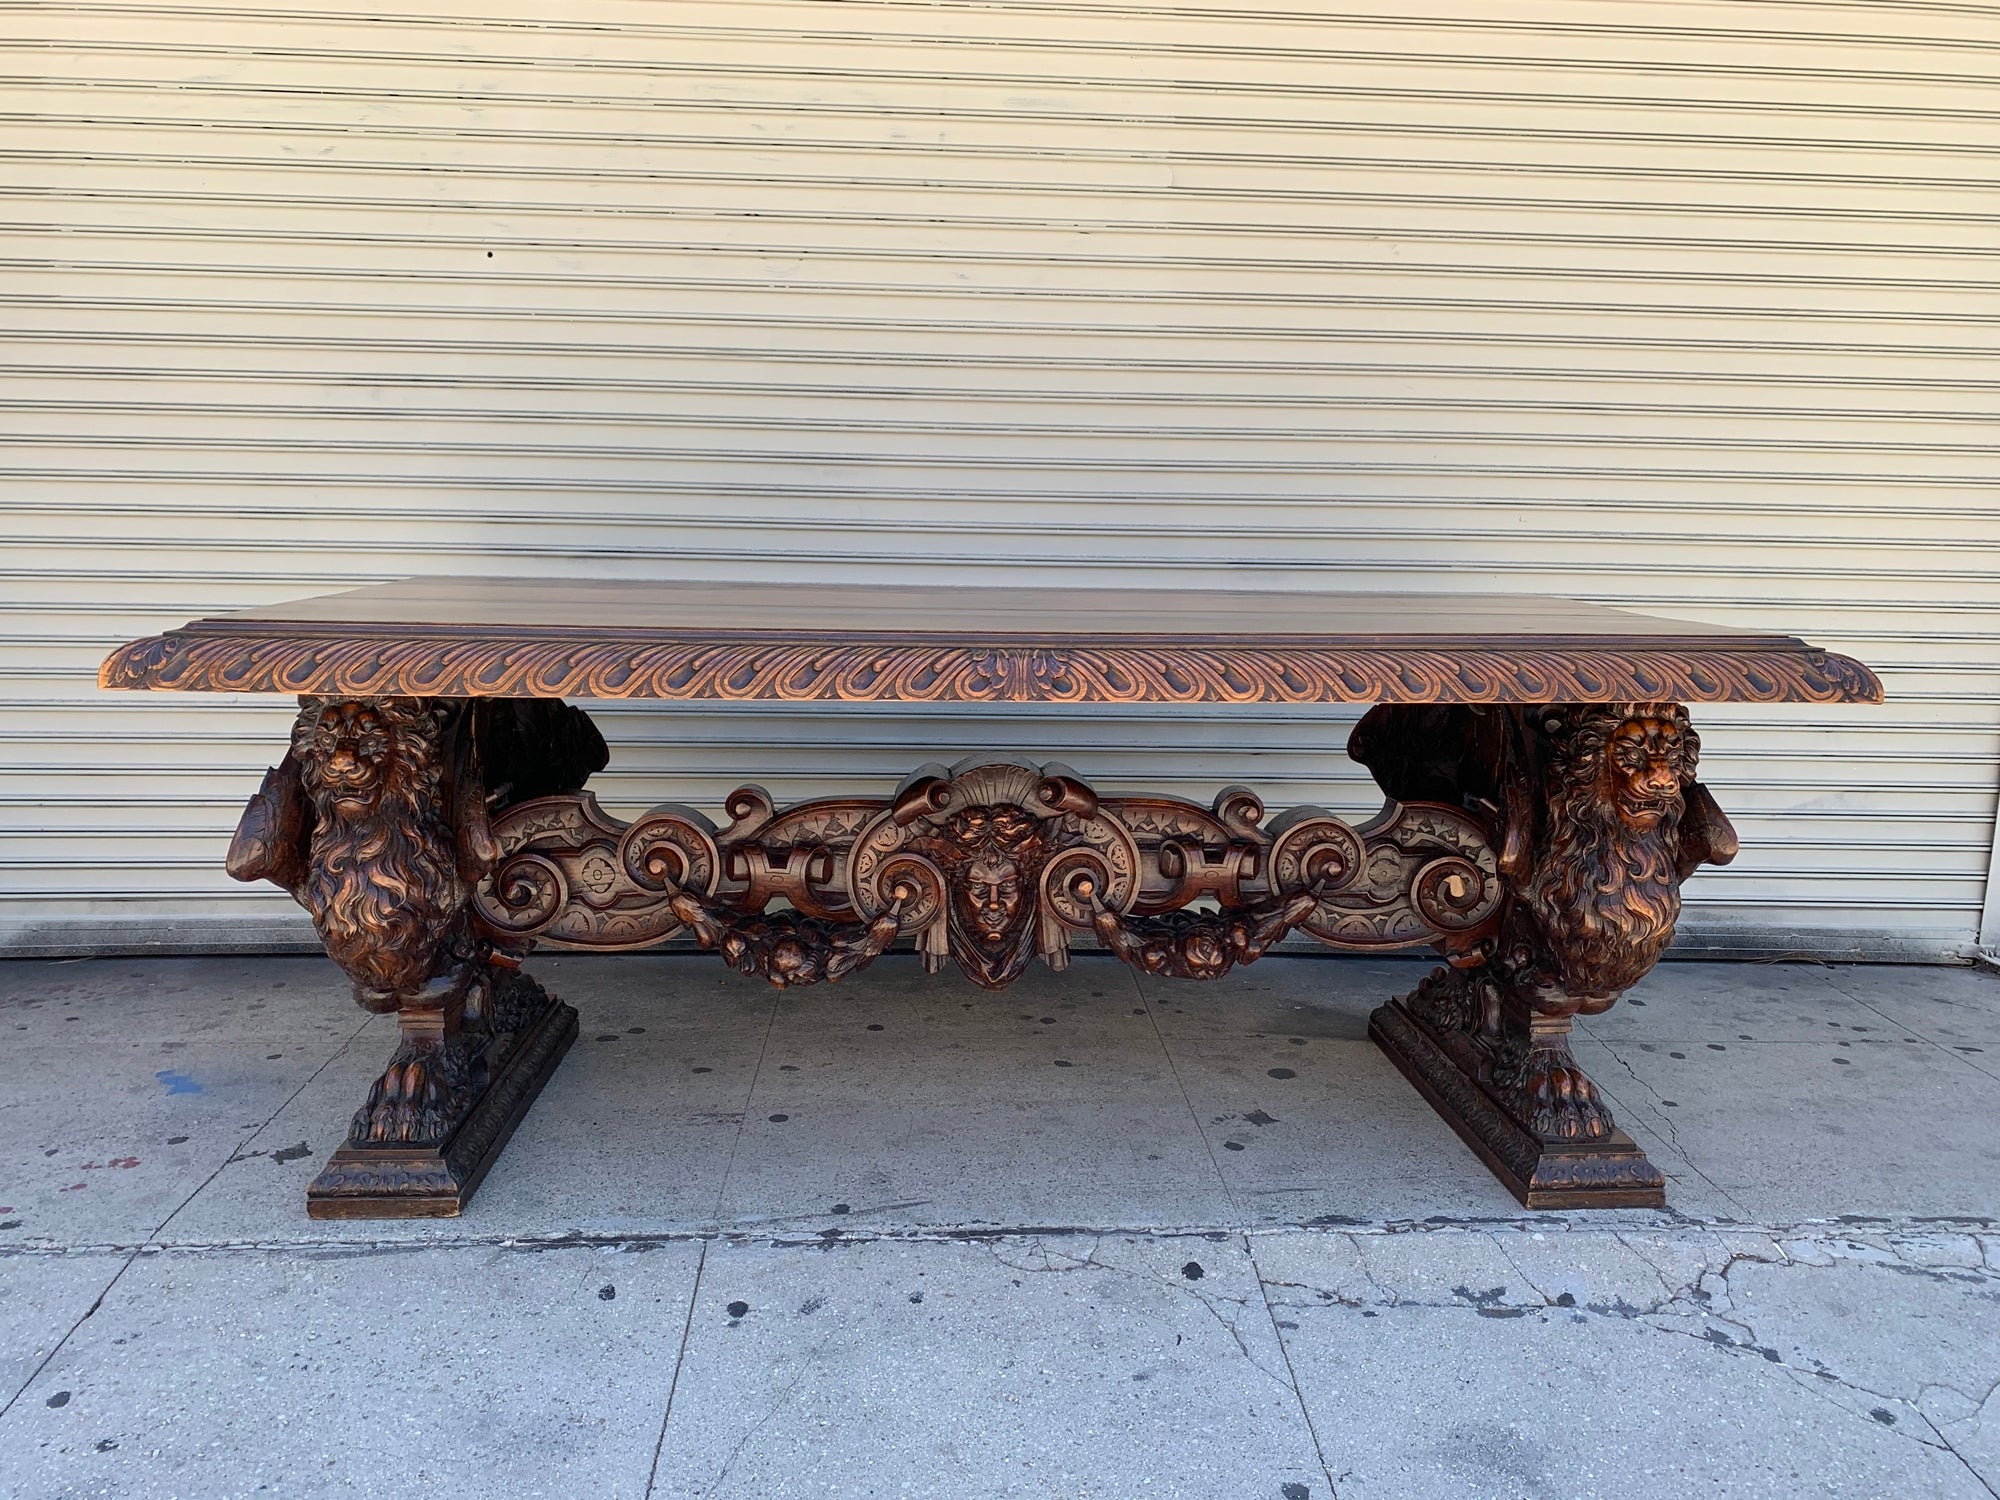 Hand-Carved Table by Master Sculptor Valentino Panciera Besarel For Sale